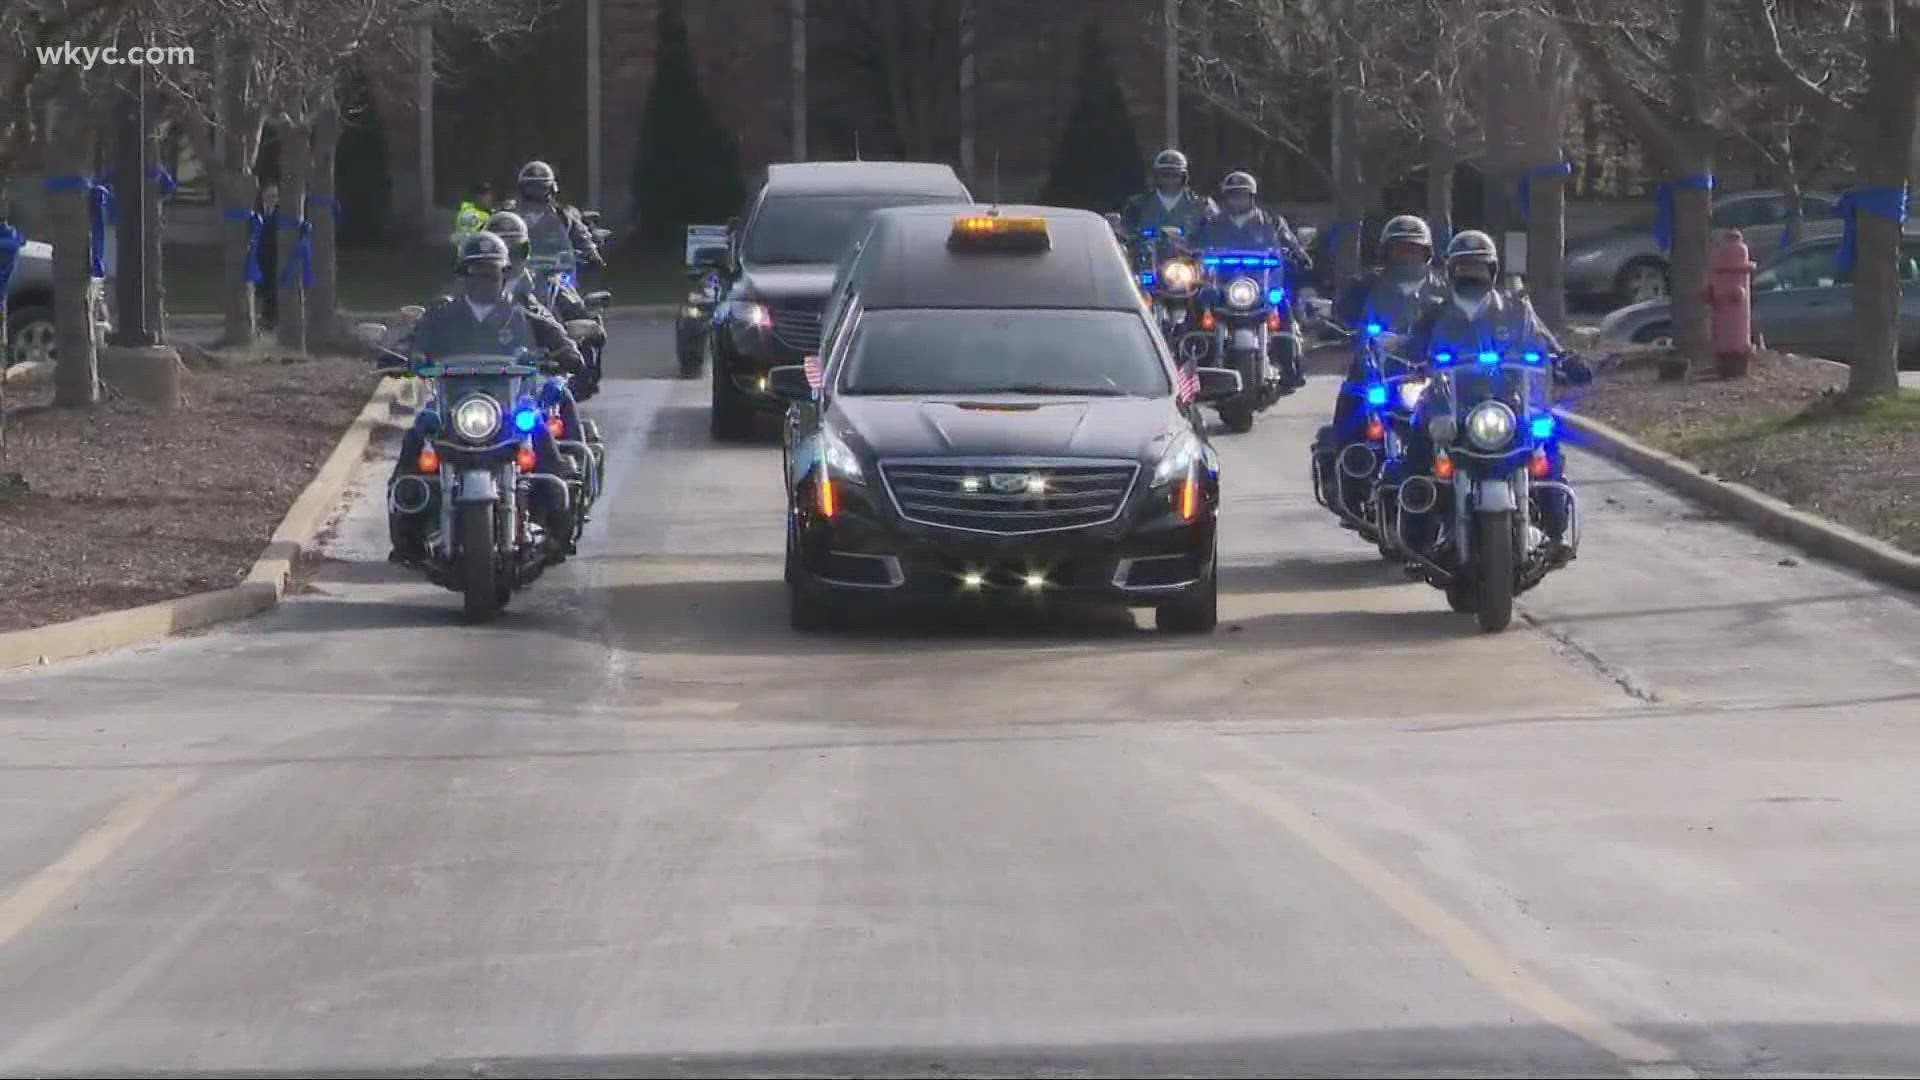 Thousands came to pay respects today, during the funeral services for officer Bartek. Brandon Simmons takes us to Middleburg Heights, for the emotional farewell.